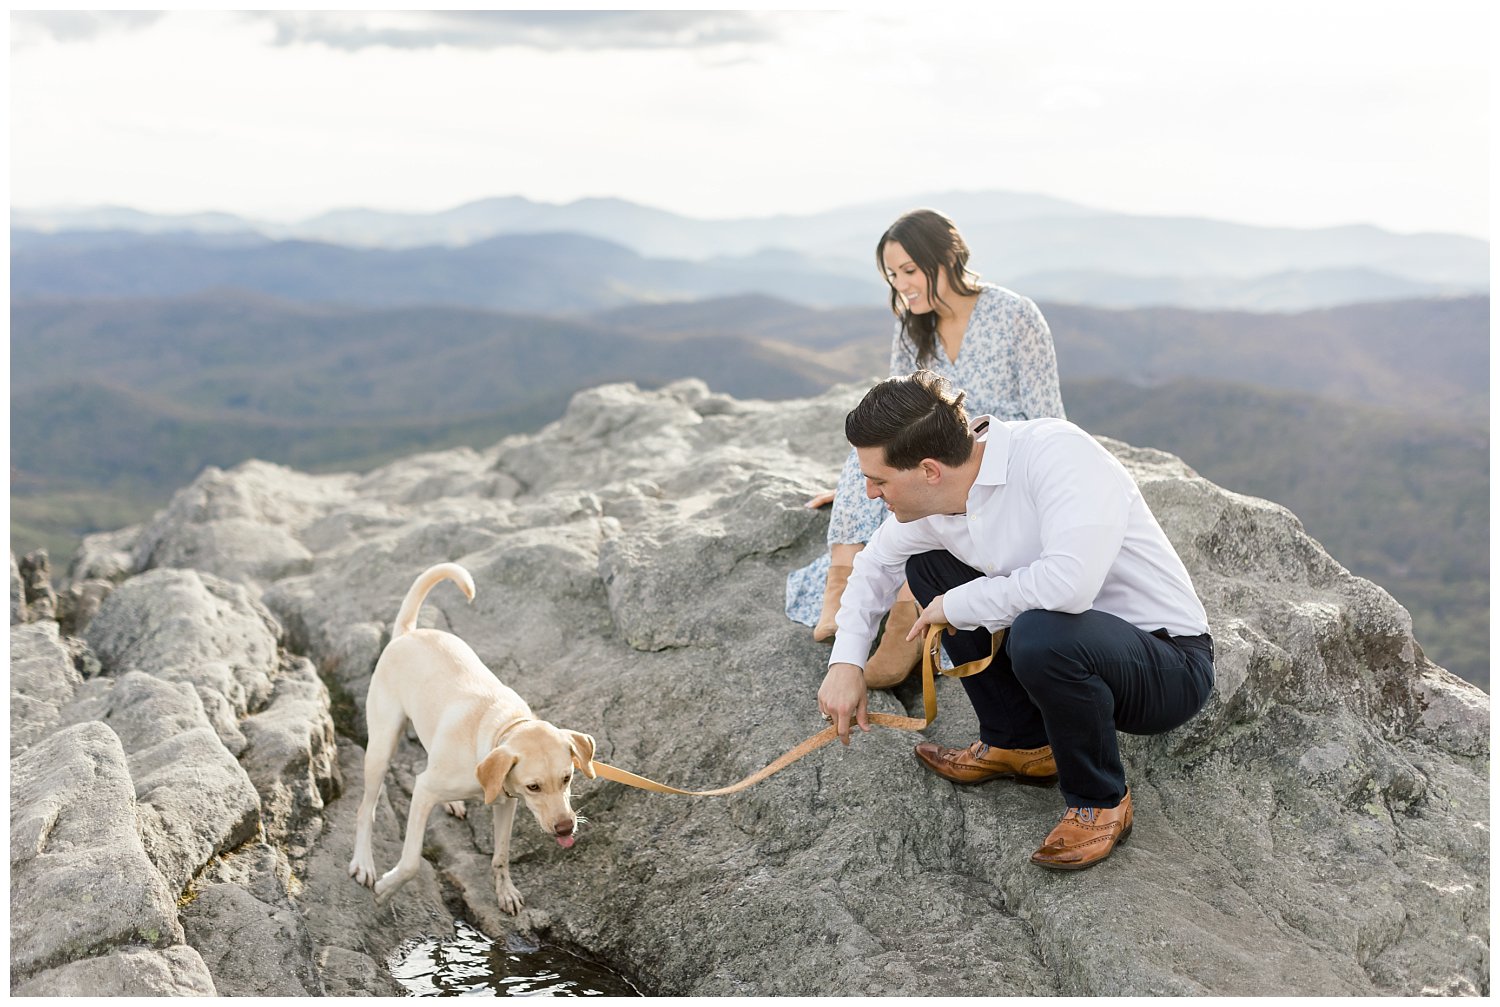 Grandfather mountain engagagement session 